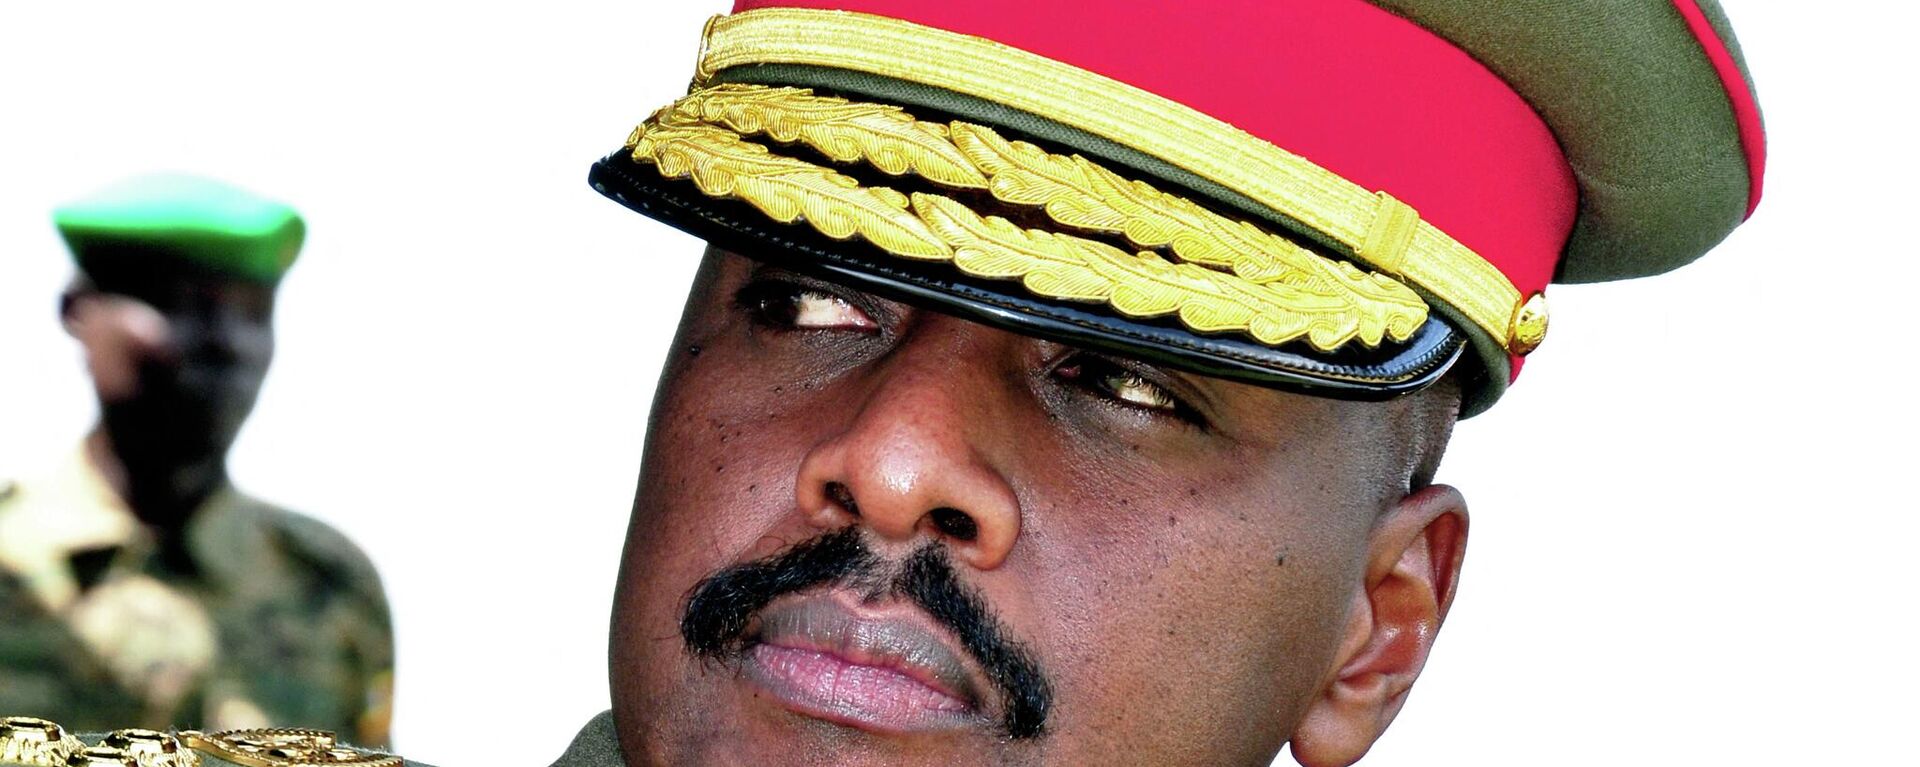 The son of Uganda's President Yoweri Museveni, Major General Muhoozi Kainerugaba attends a ceremony in which he was promoted from Brigadier to Major General at the country's military headquarters in Kampala on May 25, 2016. - The son of Uganda's President Yoweri Museveni, one of Africa's longest-serving leaders, has rejected claims that he plans to succeed his father, reports said Thursday. Muhoozi Kainerugaba, speaking on May 25 after he was promoted from Brigadier to Major General, heading the Special Forces Command (SFC), said he was happy with being in the military, the government-owned New Vision newspaper reported. (Photo by PETER BUSOMOKE / AFP) - Sputnik International, 1920, 25.09.2022